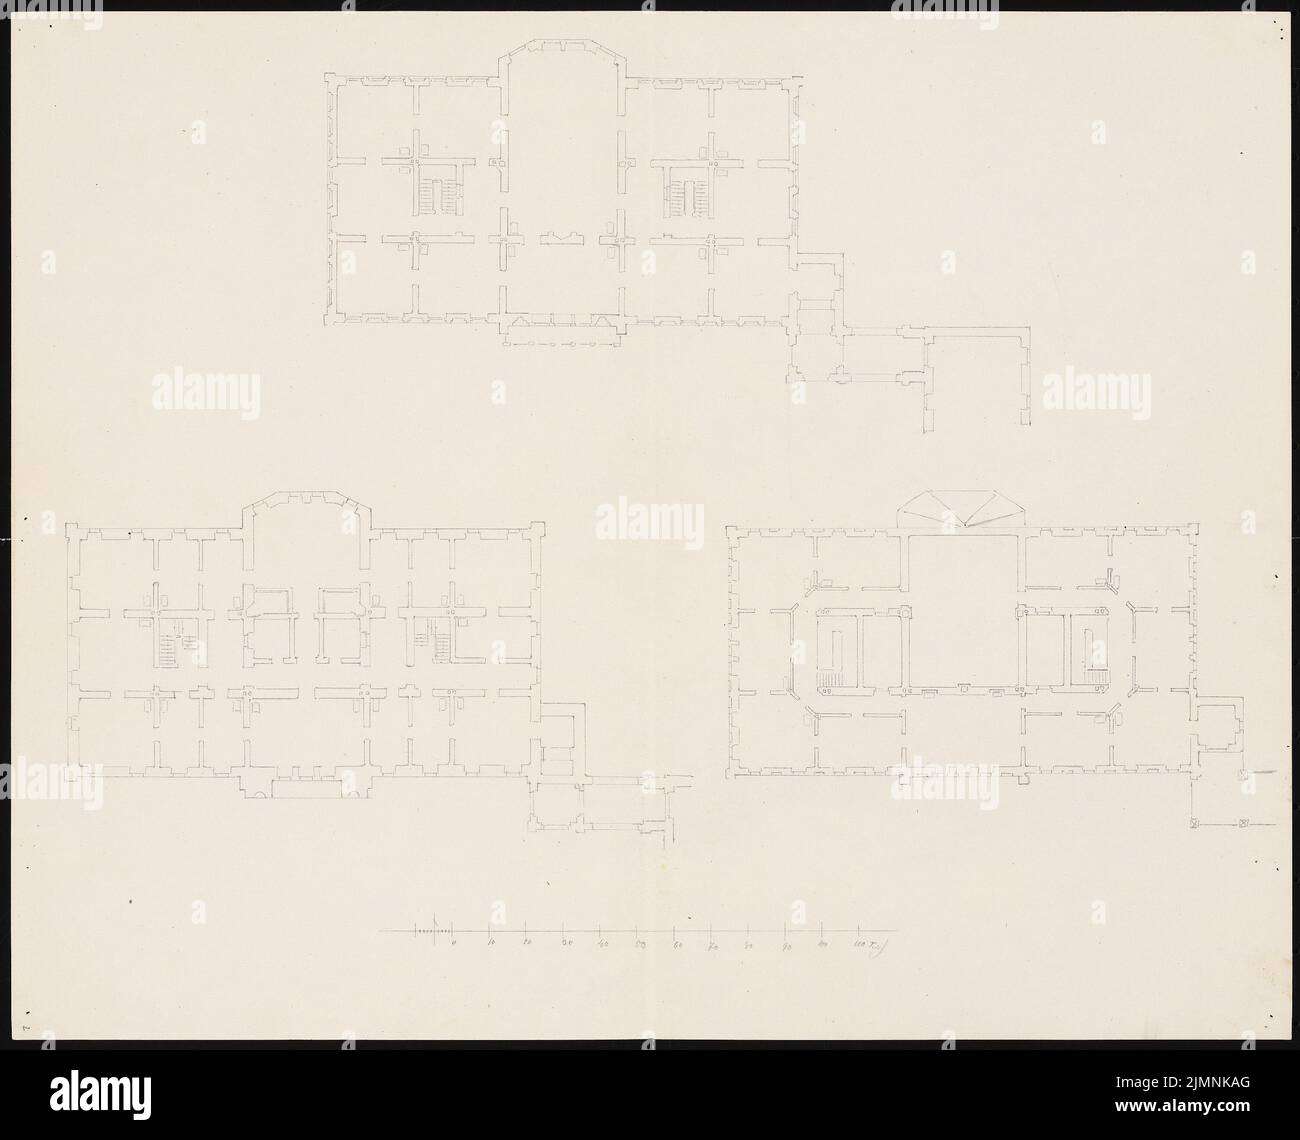 Knoblauch Eduard (1801-1865), manor house in Lauchstädt (approx. 1848): floor plan basement, ground and upper floor. Pencil, 35 x 43.3 cm (including scan edges) Stock Photo